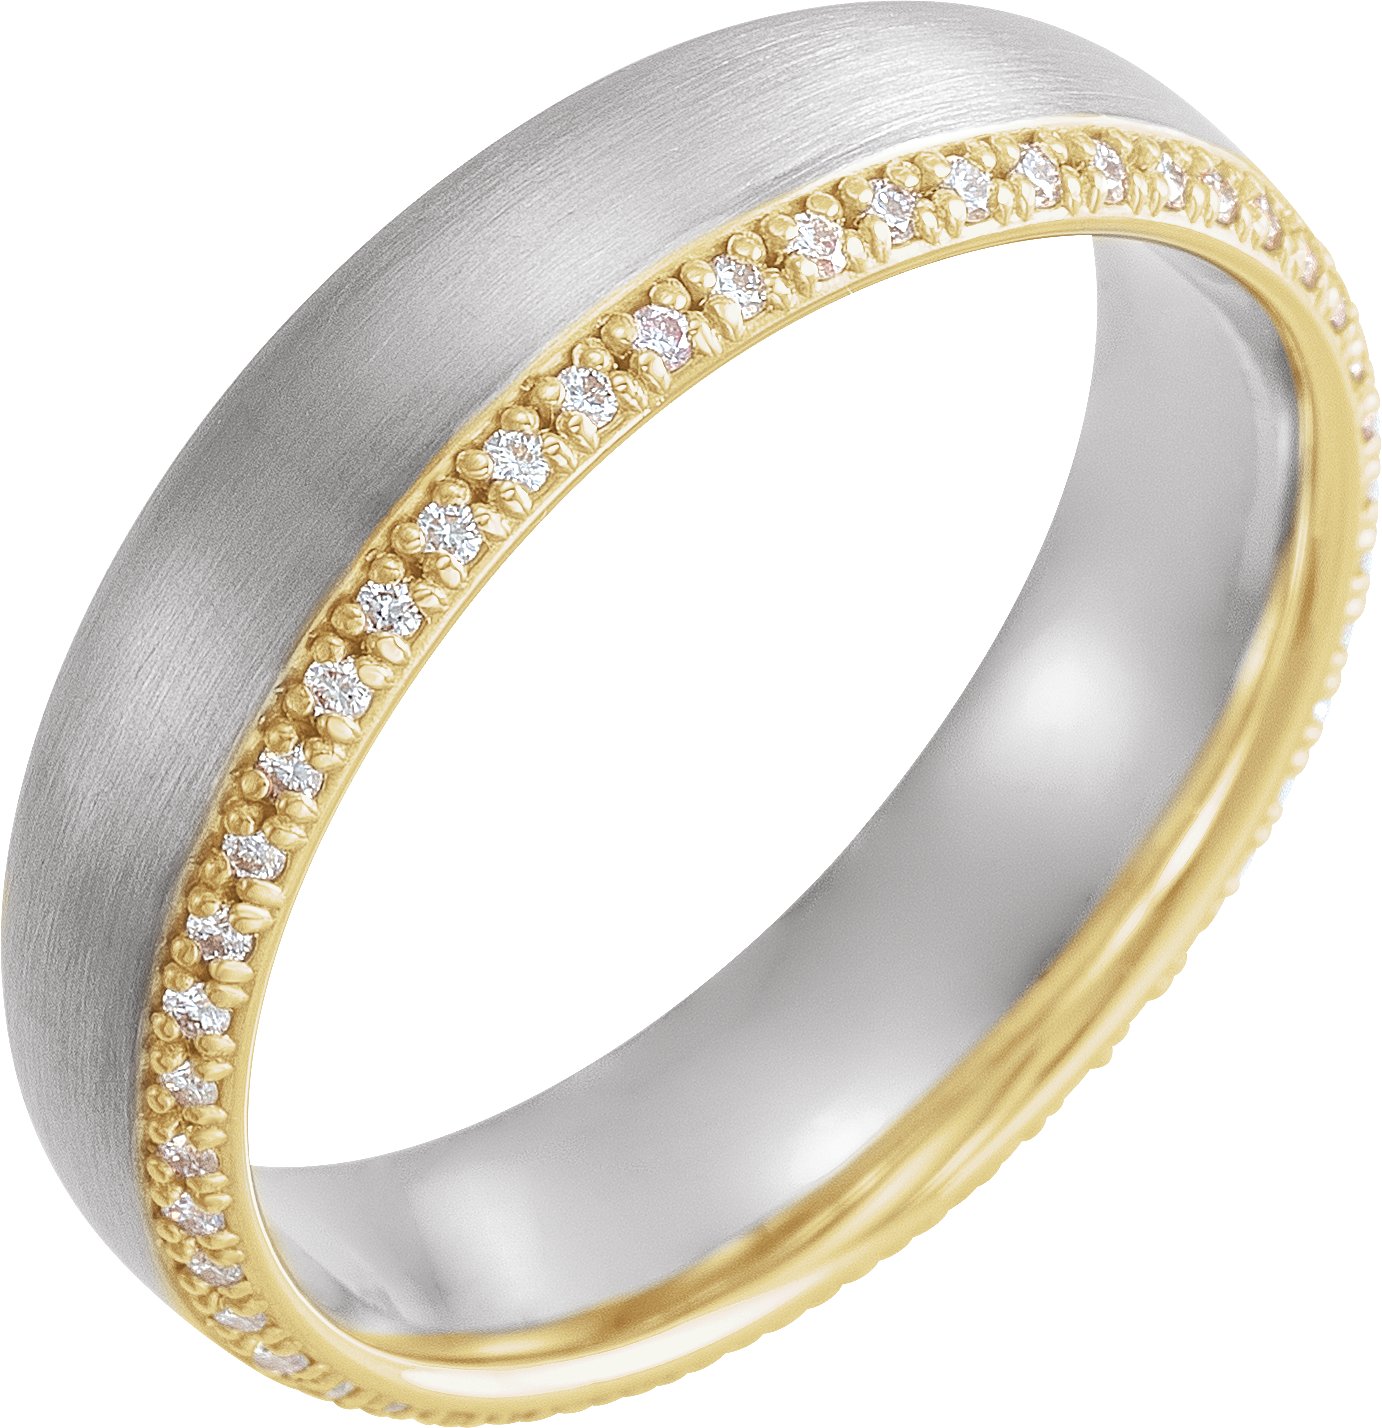 14K White and Yellow 6 mm .25 CTW Diamond Band Size 11 Ref 10167789